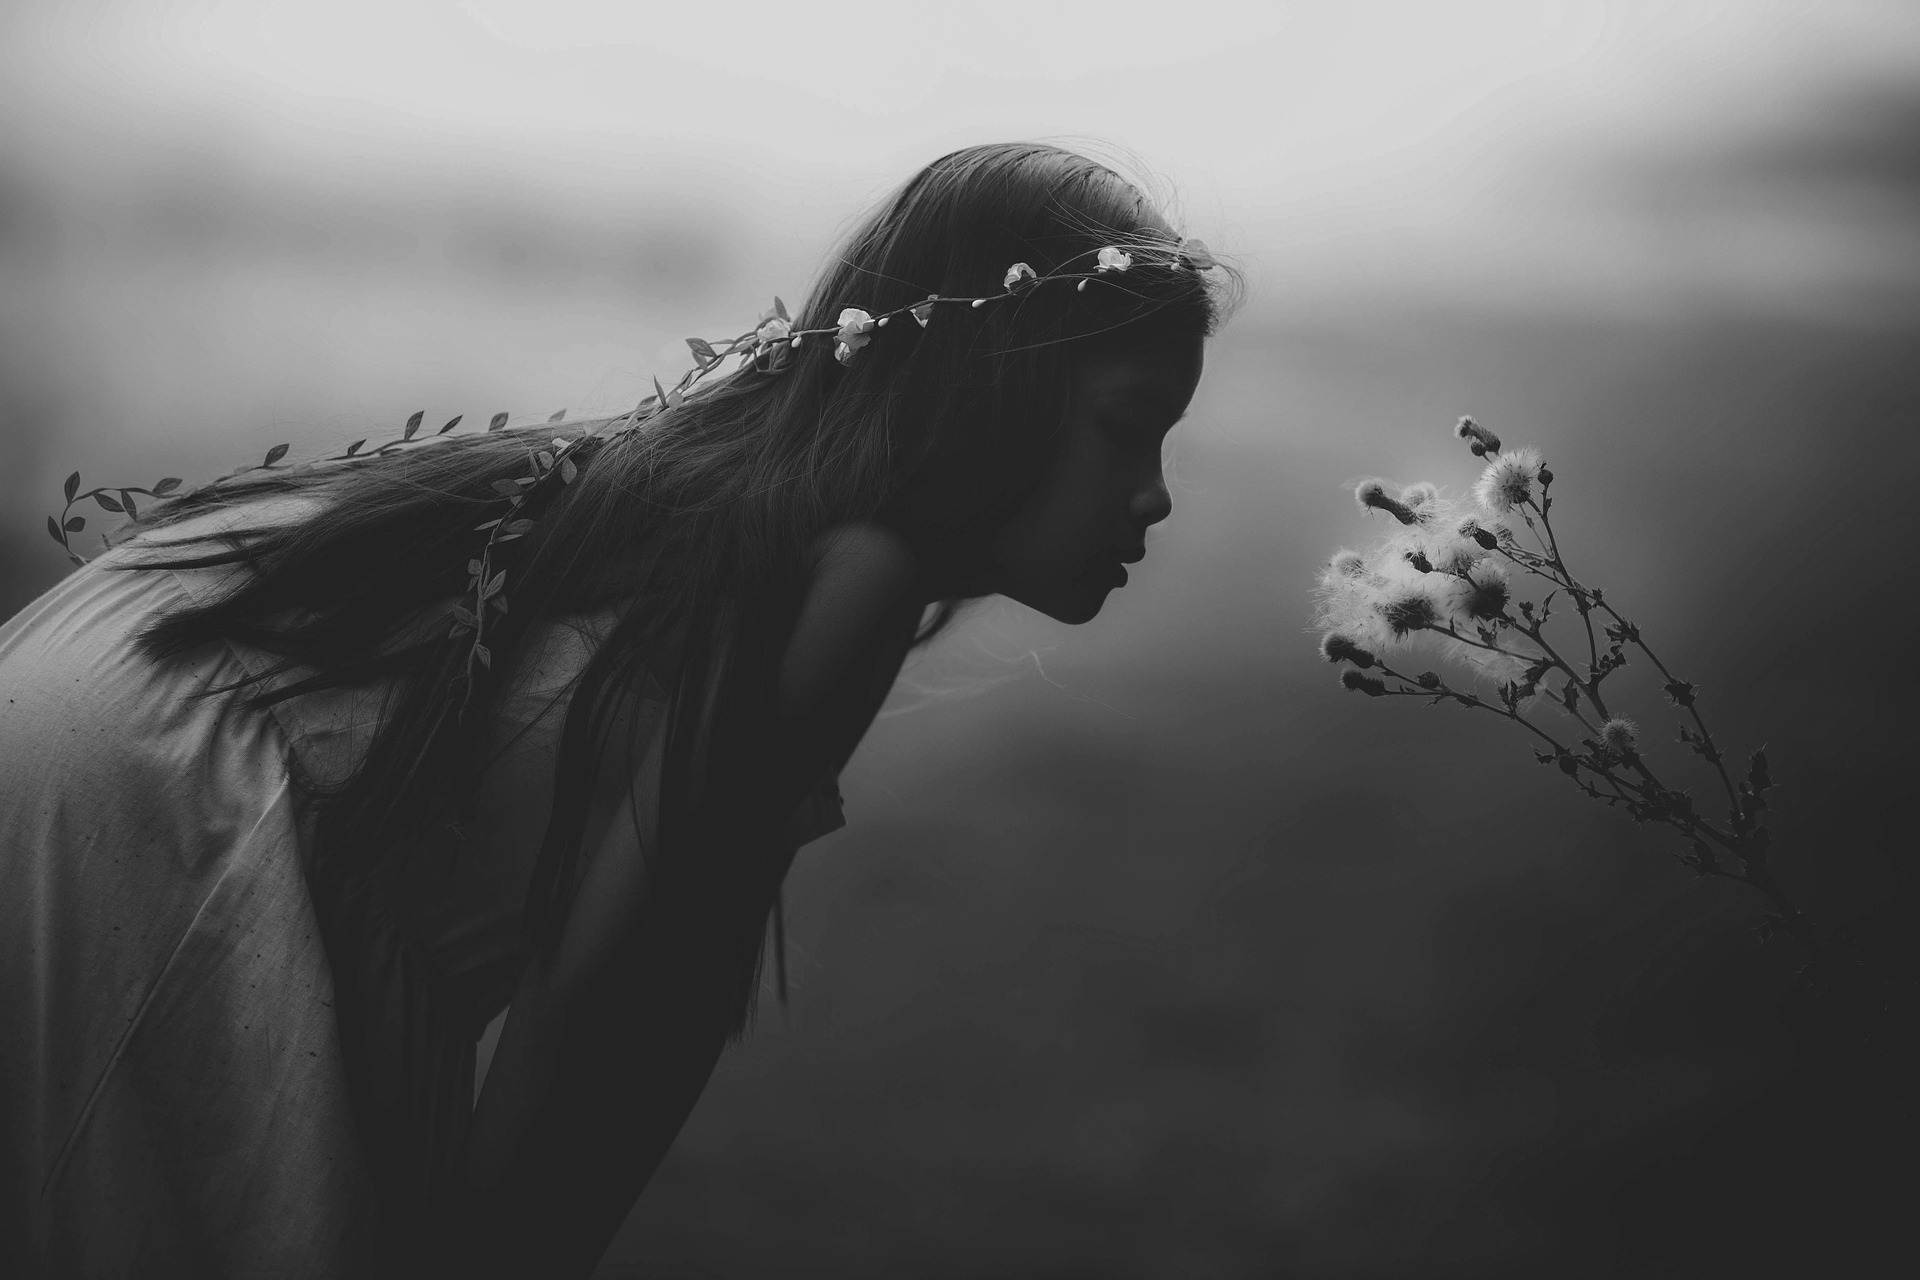 Young girl smells a flower, silhouette, black, white, mystic